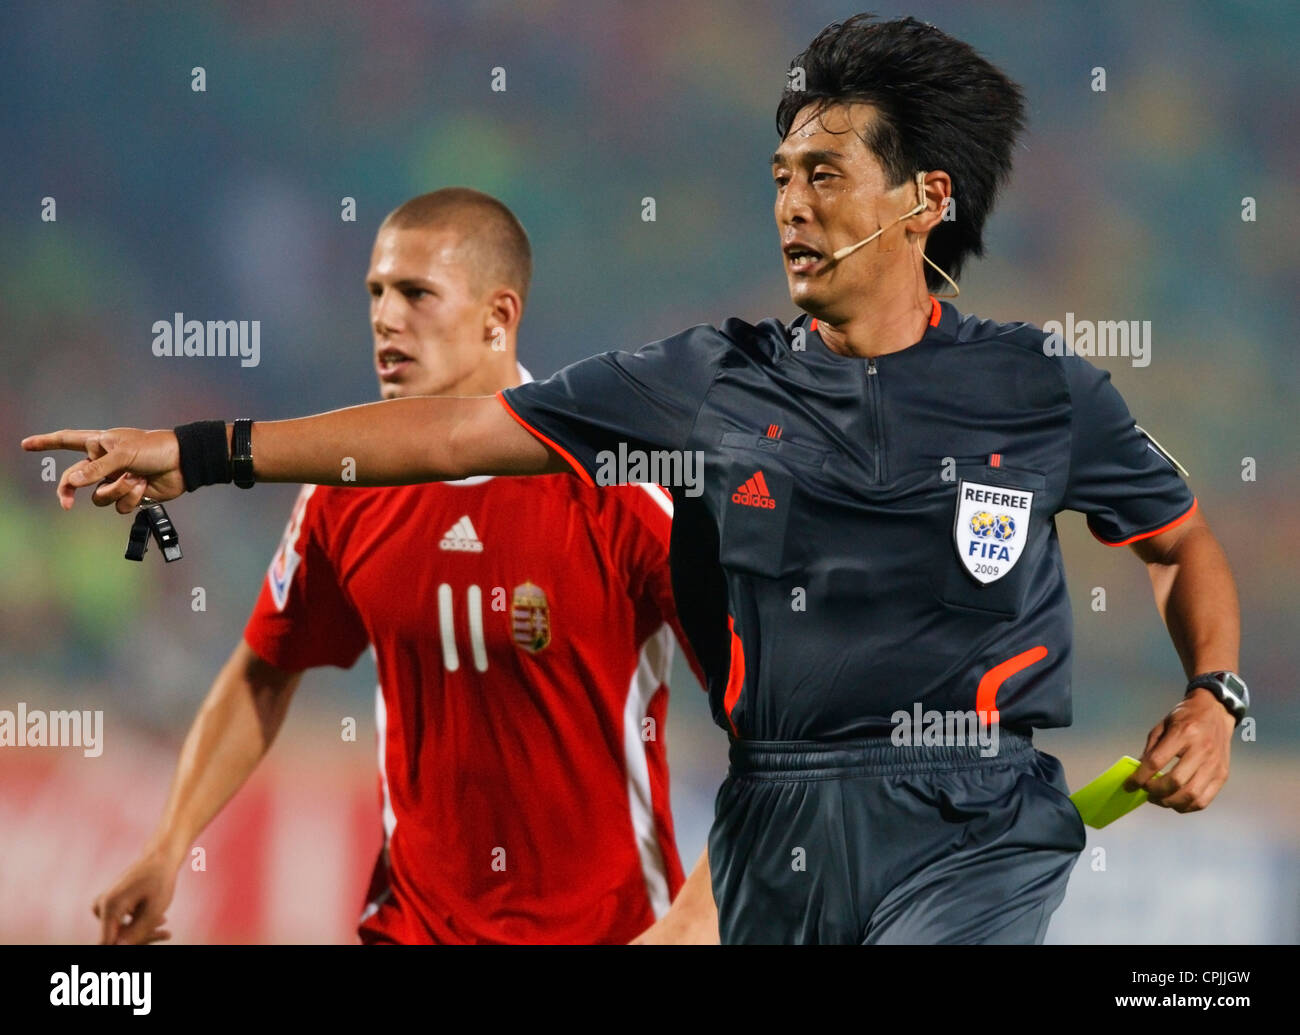 Referee Yuichi Nishimura (Japan) gestures to the penalty spot while pulling out a yellow card during a FIFA U-20 World Cup match Stock Photo